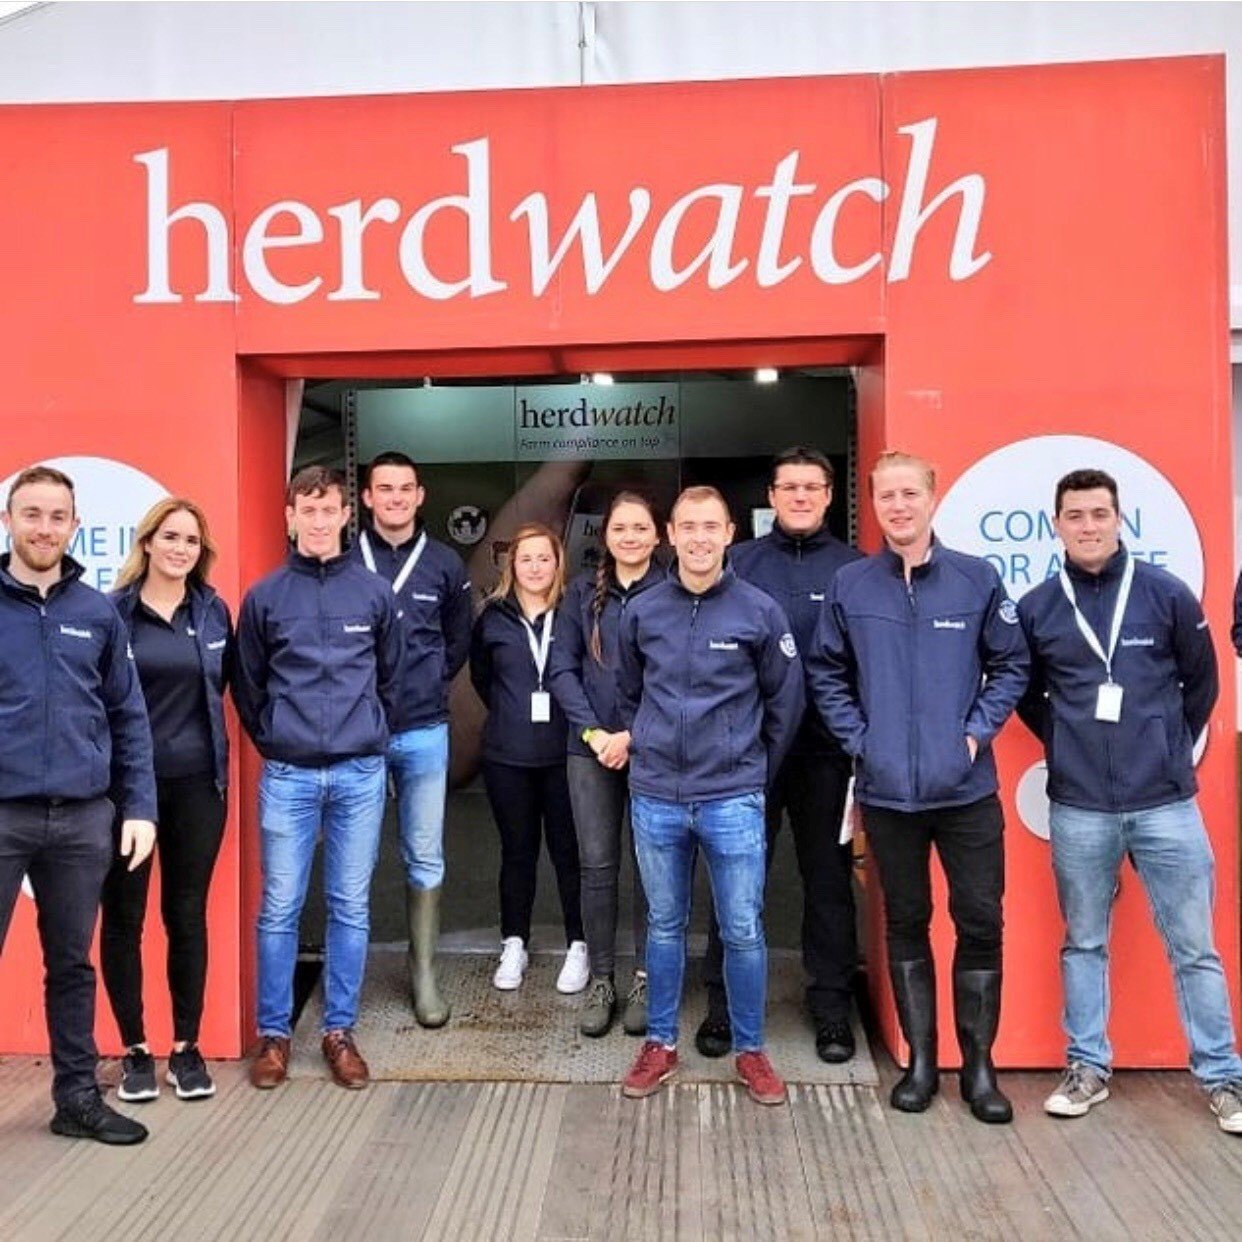 ploughing herdwatch team photo 15-1